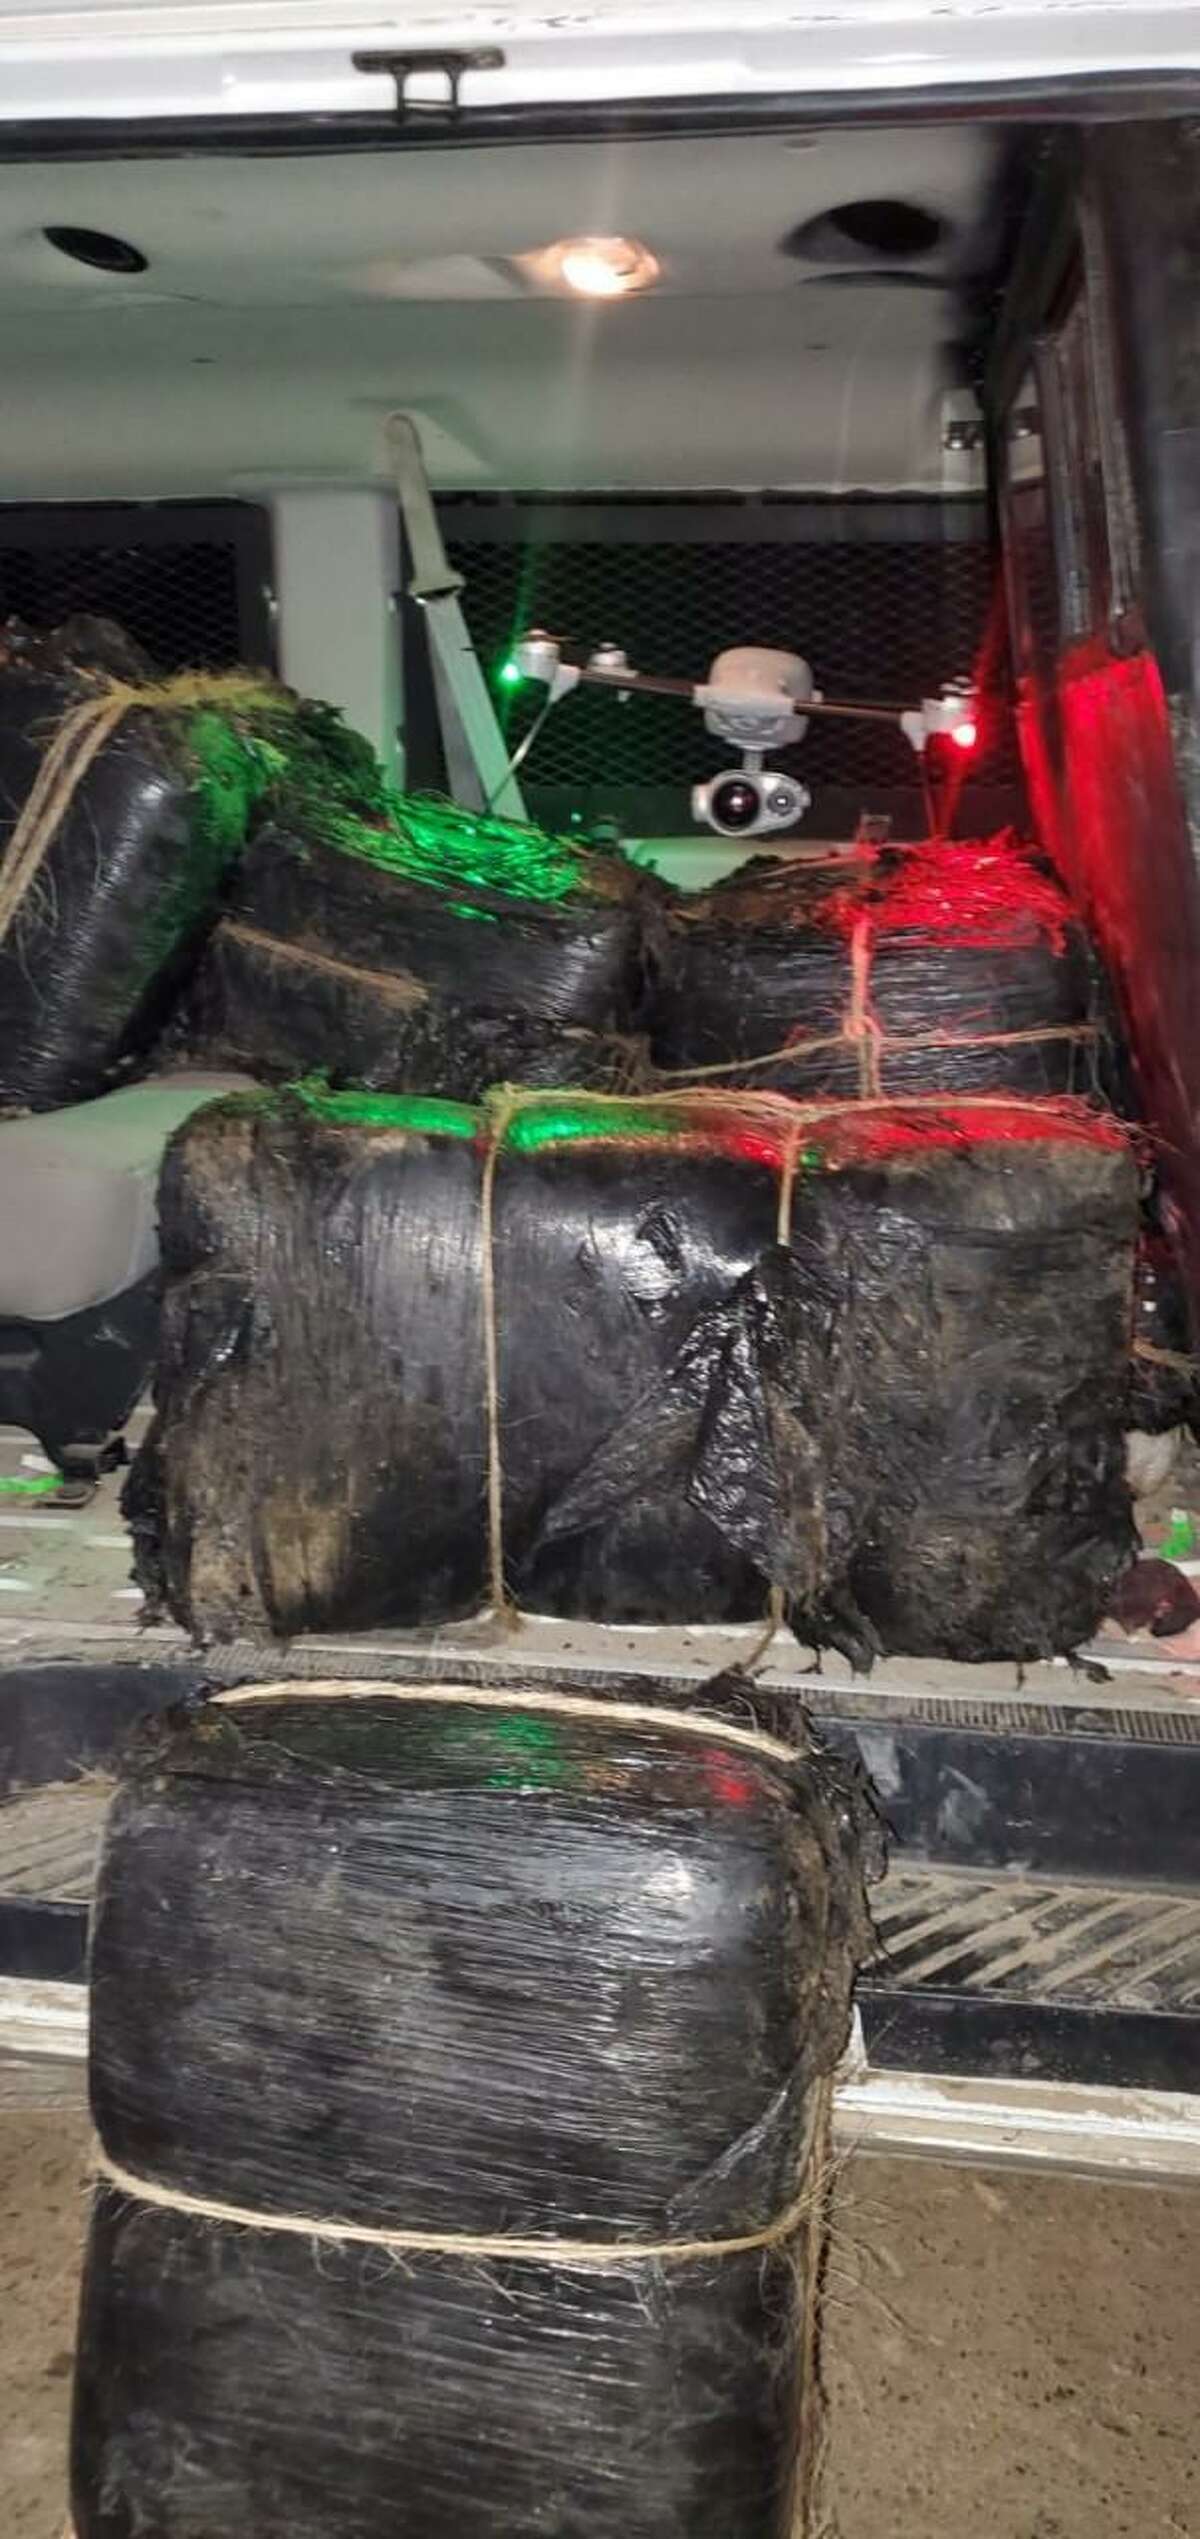 U.S. Border Patrol agents seized about $750,000 worth of marijuana in two smuggling attempts reported on Wednesday in west Laredo.